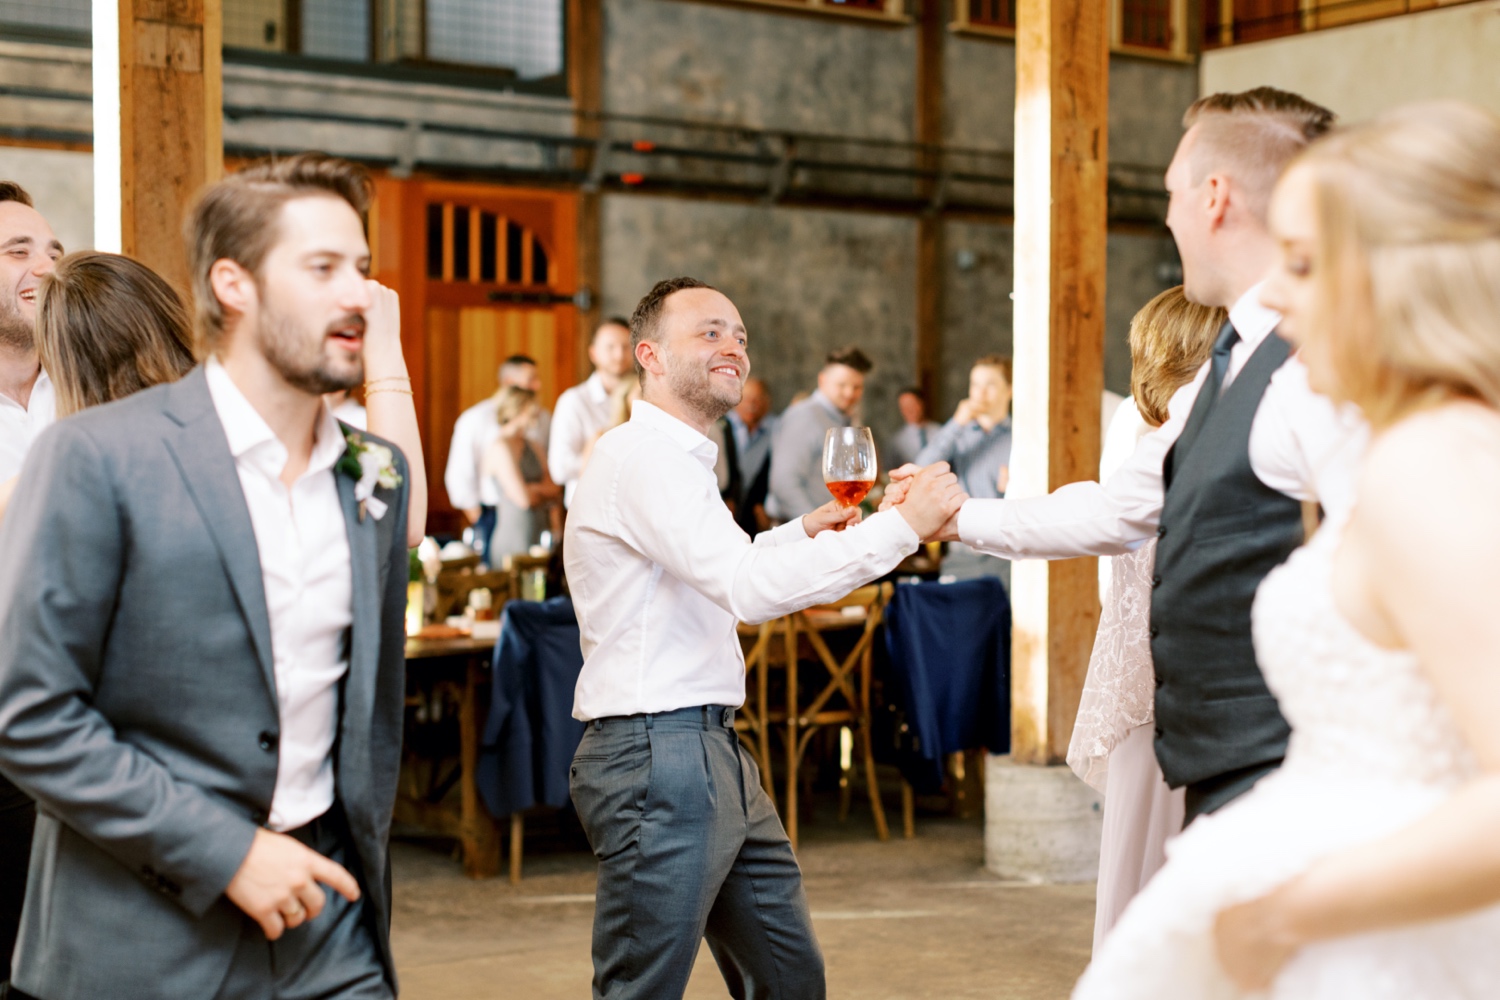 Guests dancing at Abeja Winery wedding reception